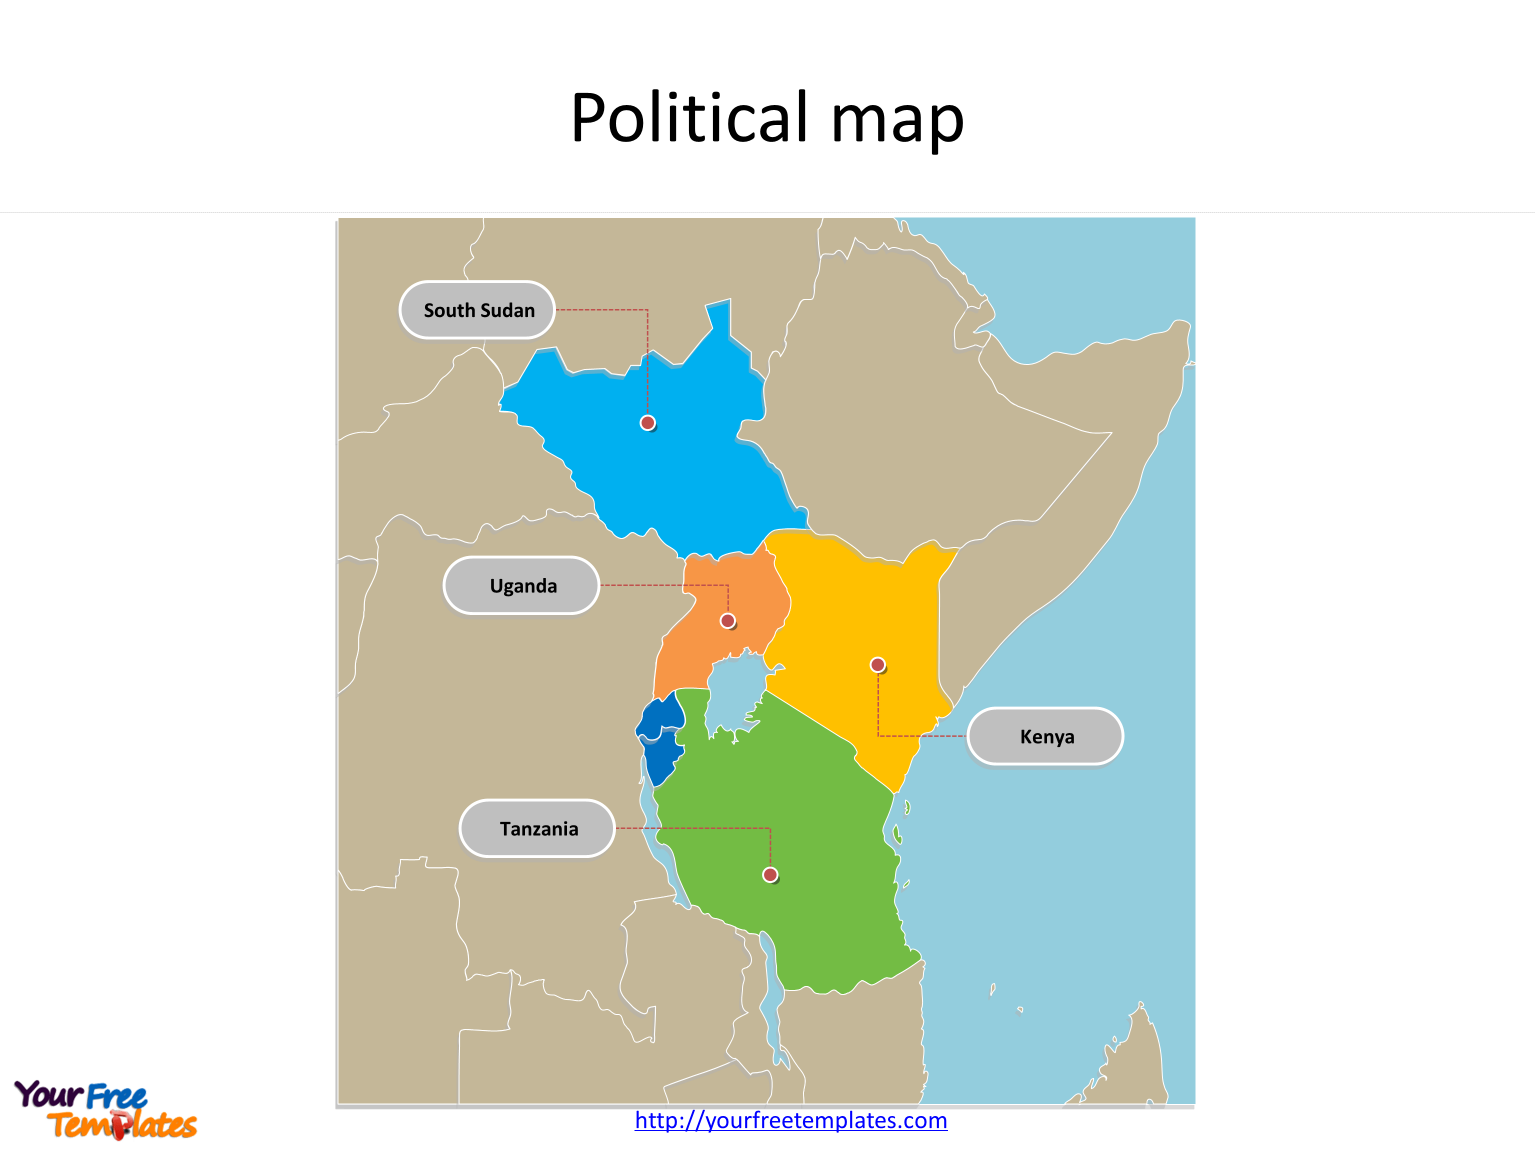 Map of East African Community with outline and cities labeled on the East African Community PowerPoint map